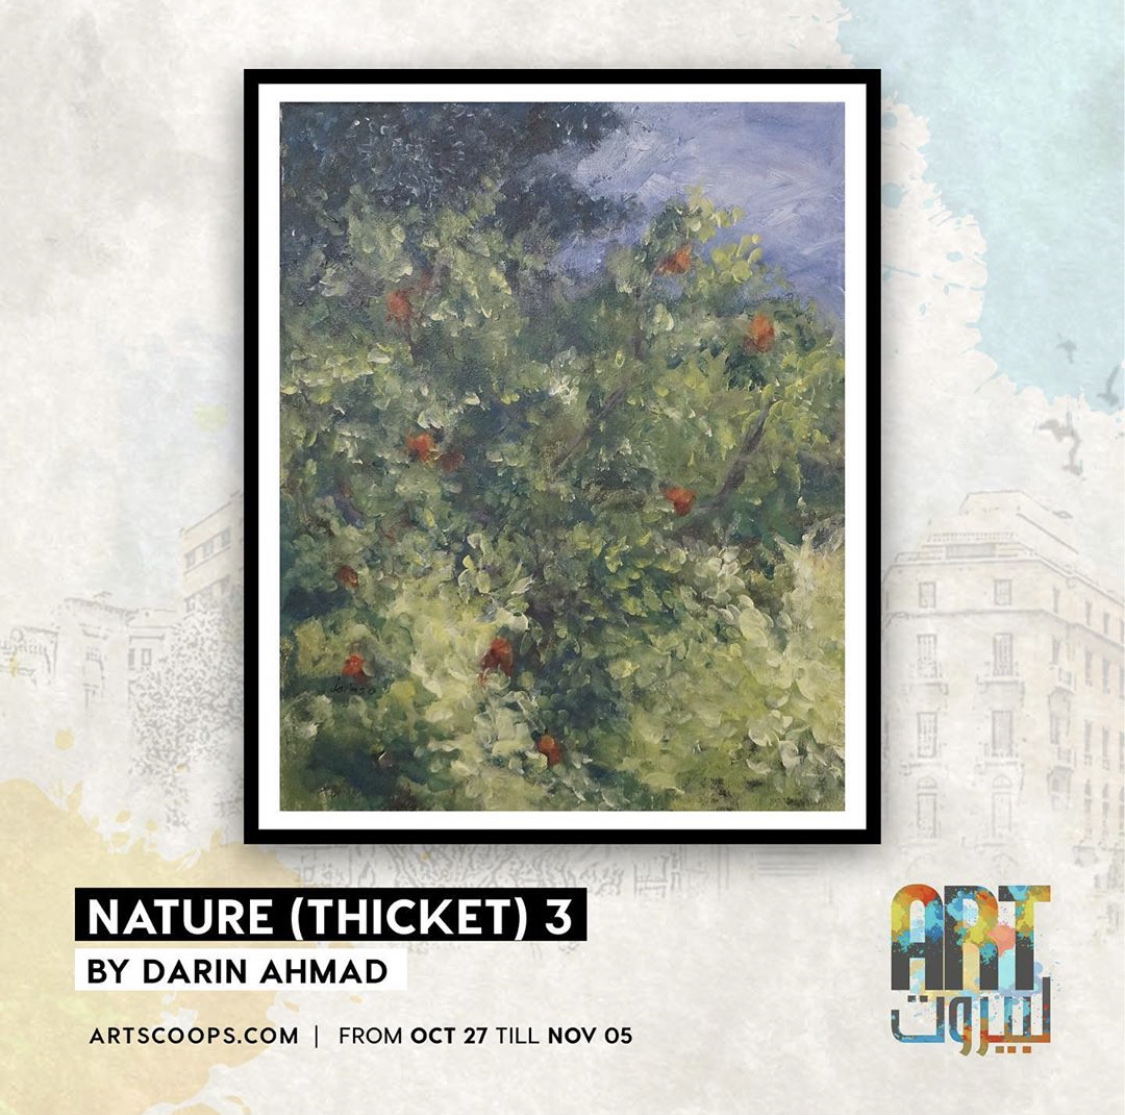 Artscoops - Nature (Thicket) 3 